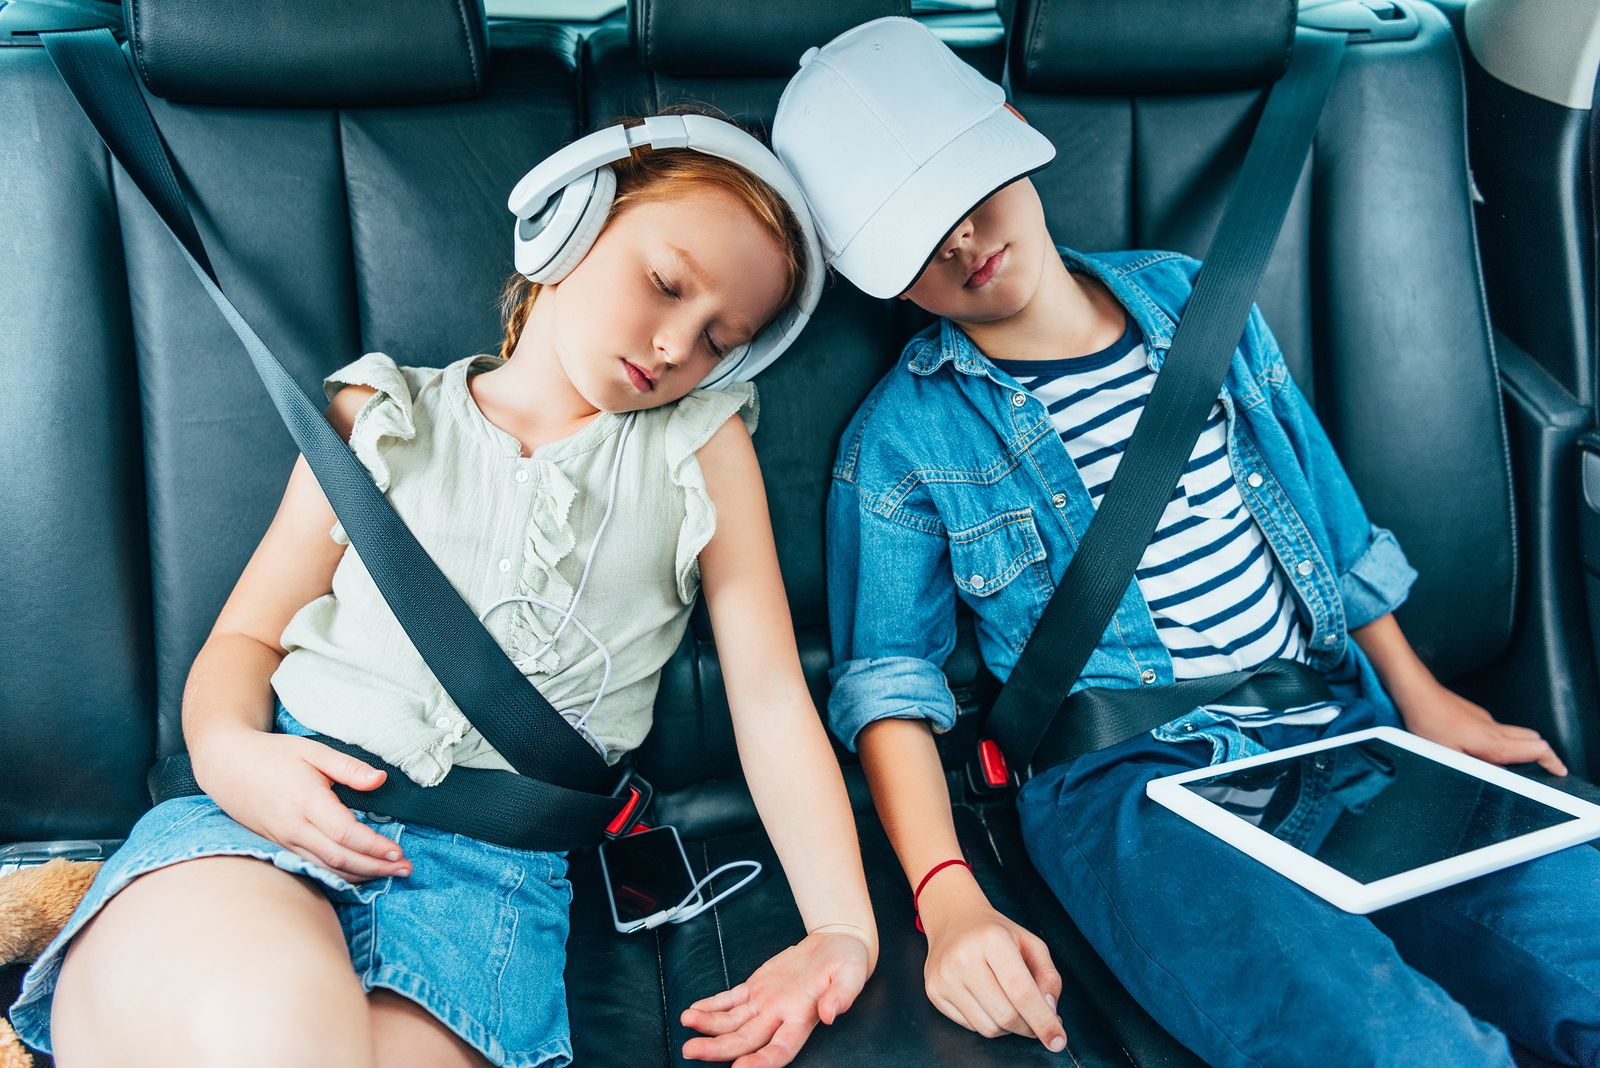 Youngsters asleep in back of car with mobile phone and media pad